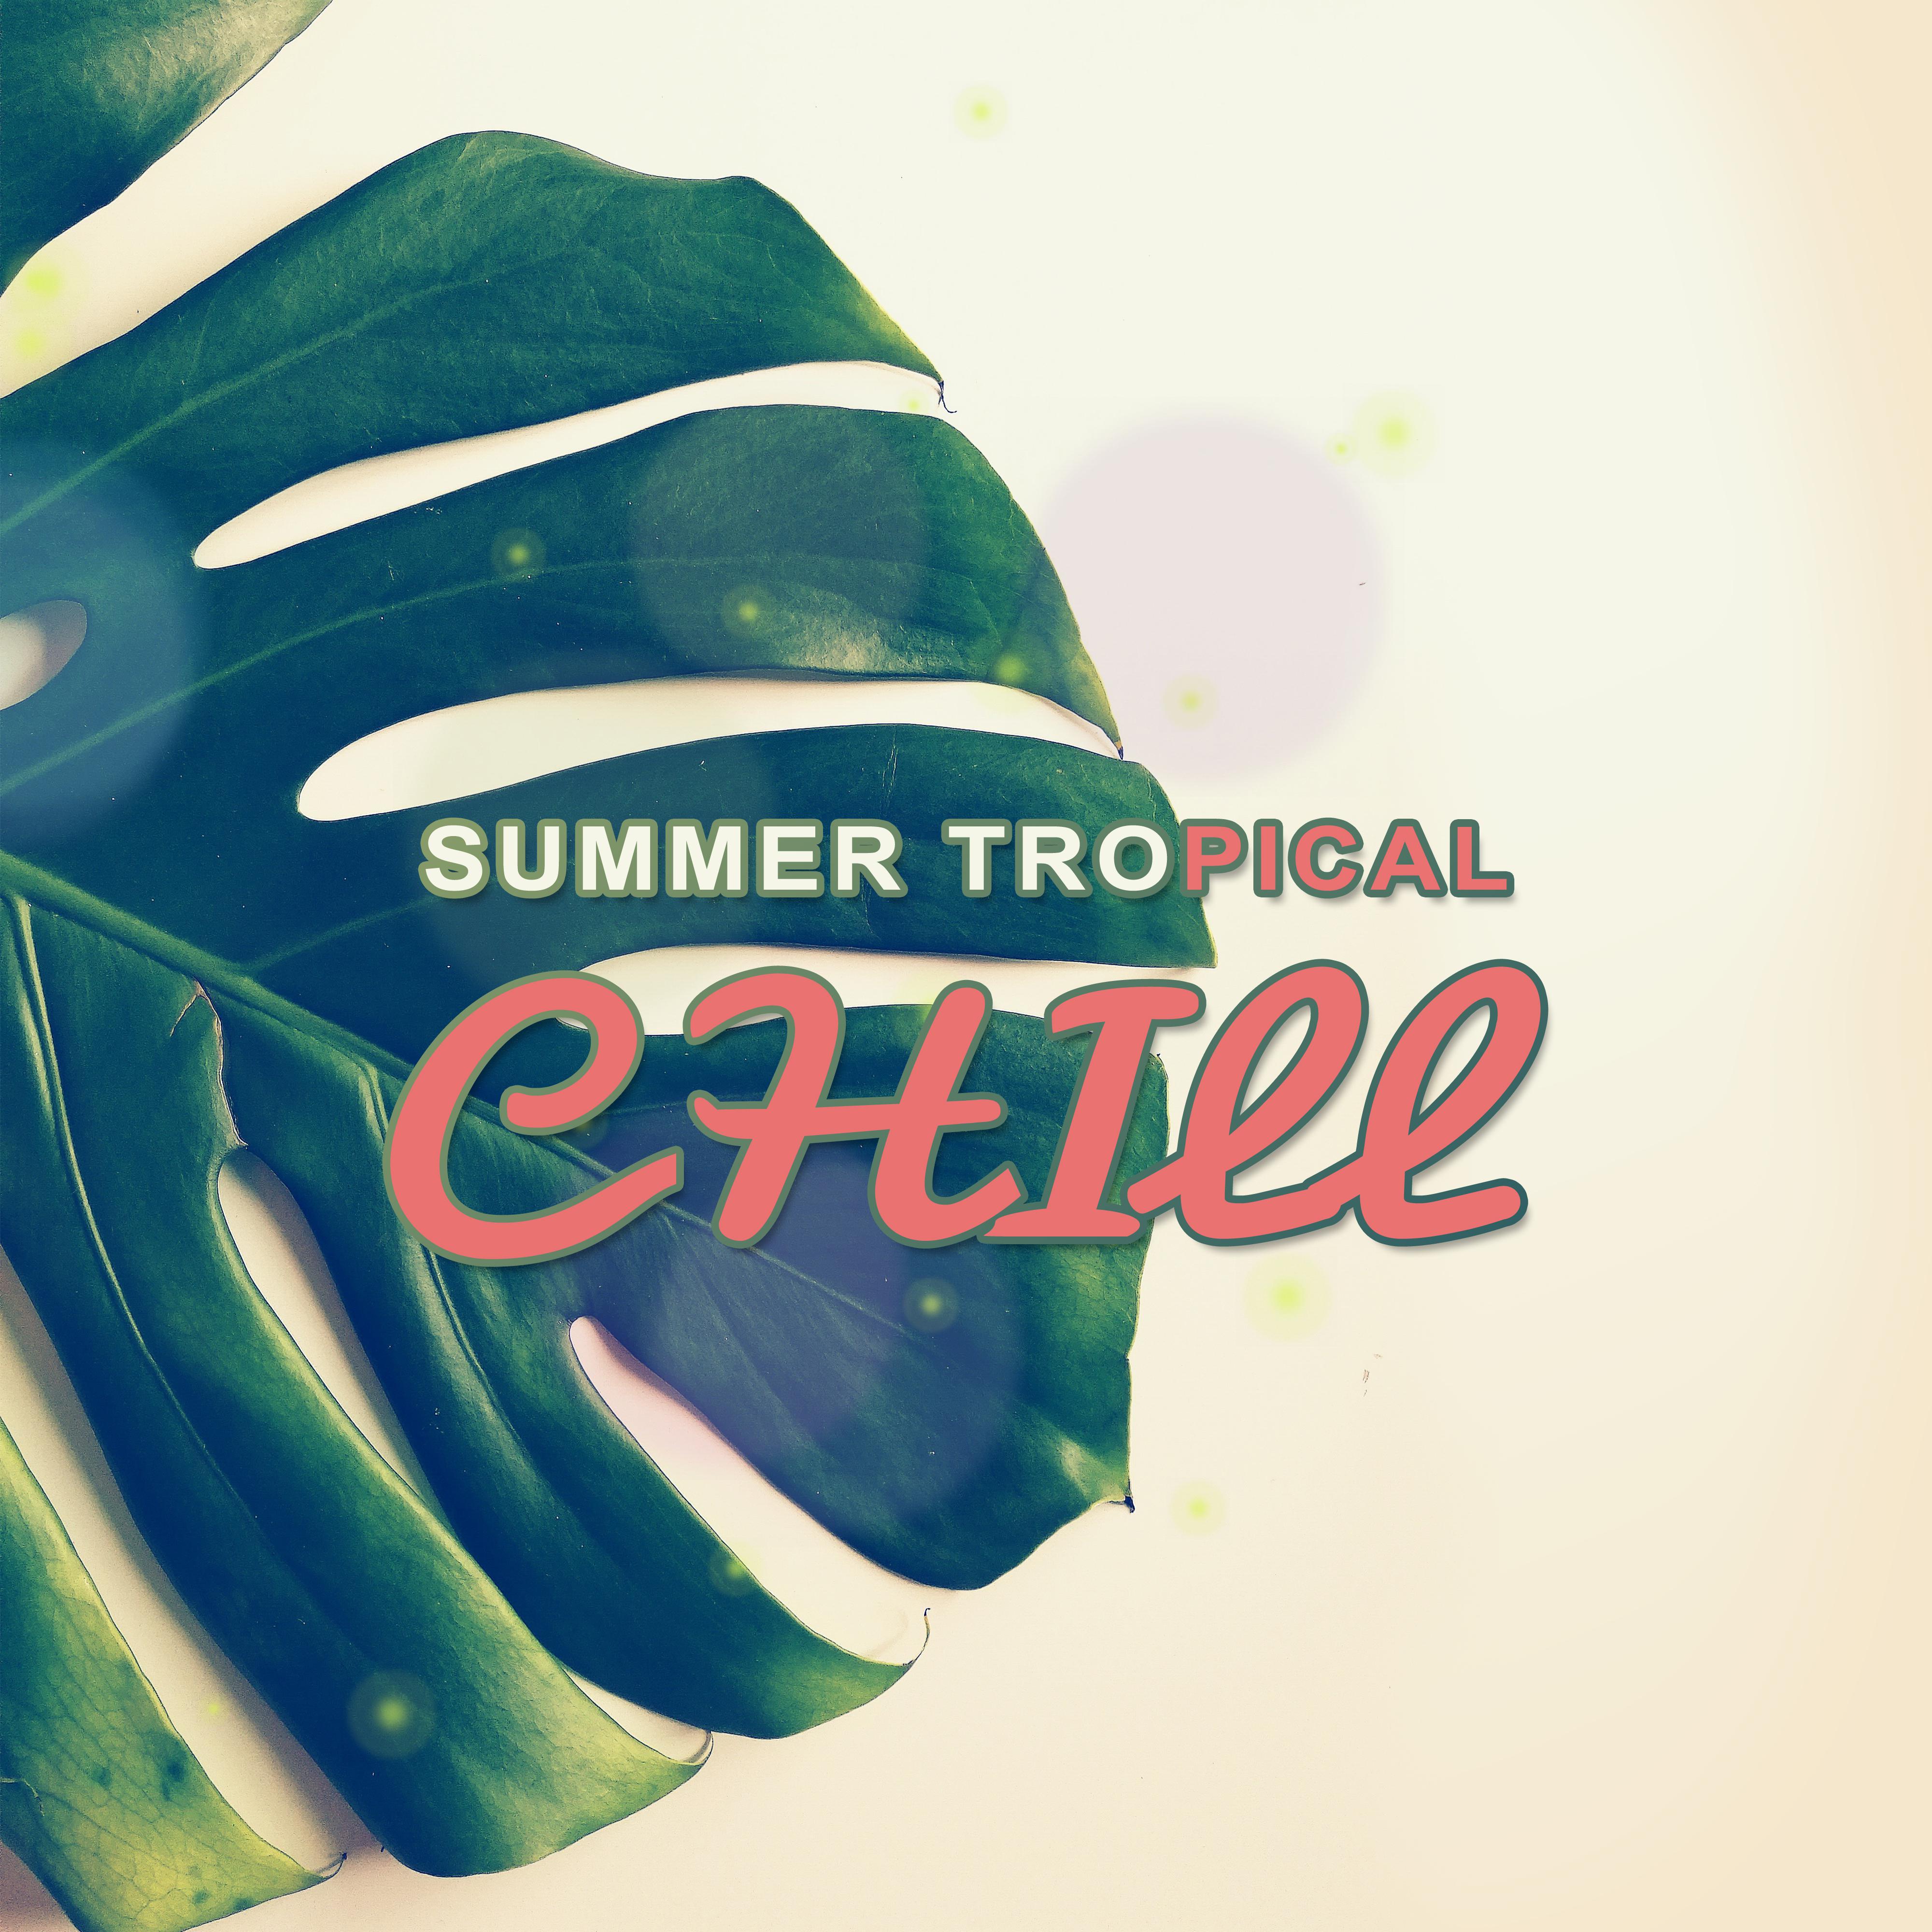 Summer Tropical Chill – Peaceful Tropical Island, Exotic Chill Out, Holiday Vibes, Soothing Sounds